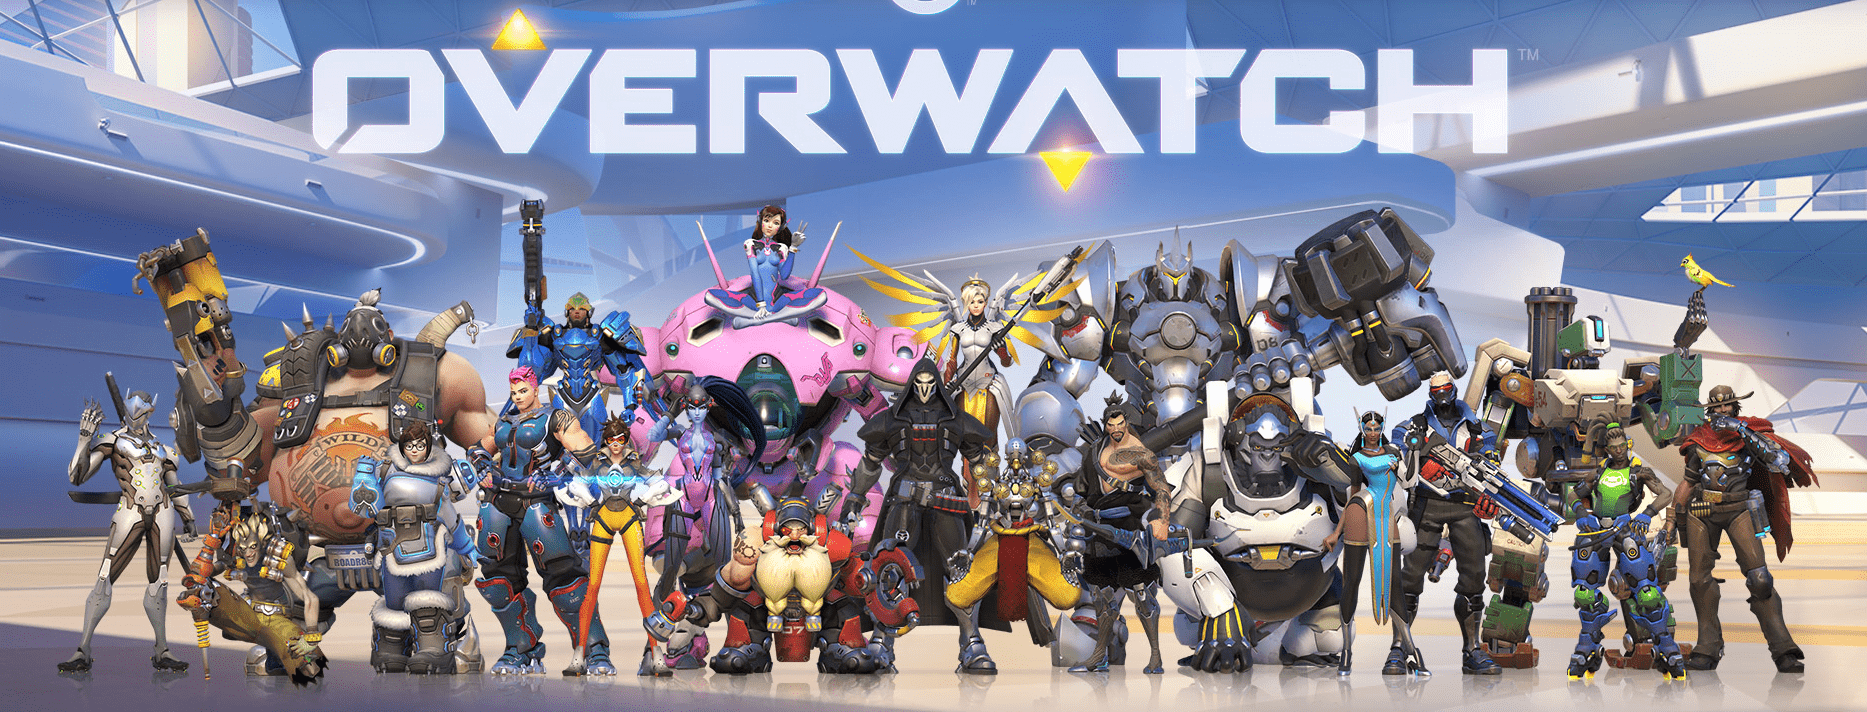 Overwatch Update 2.66 Patch Notes For PS4 Full Details Here